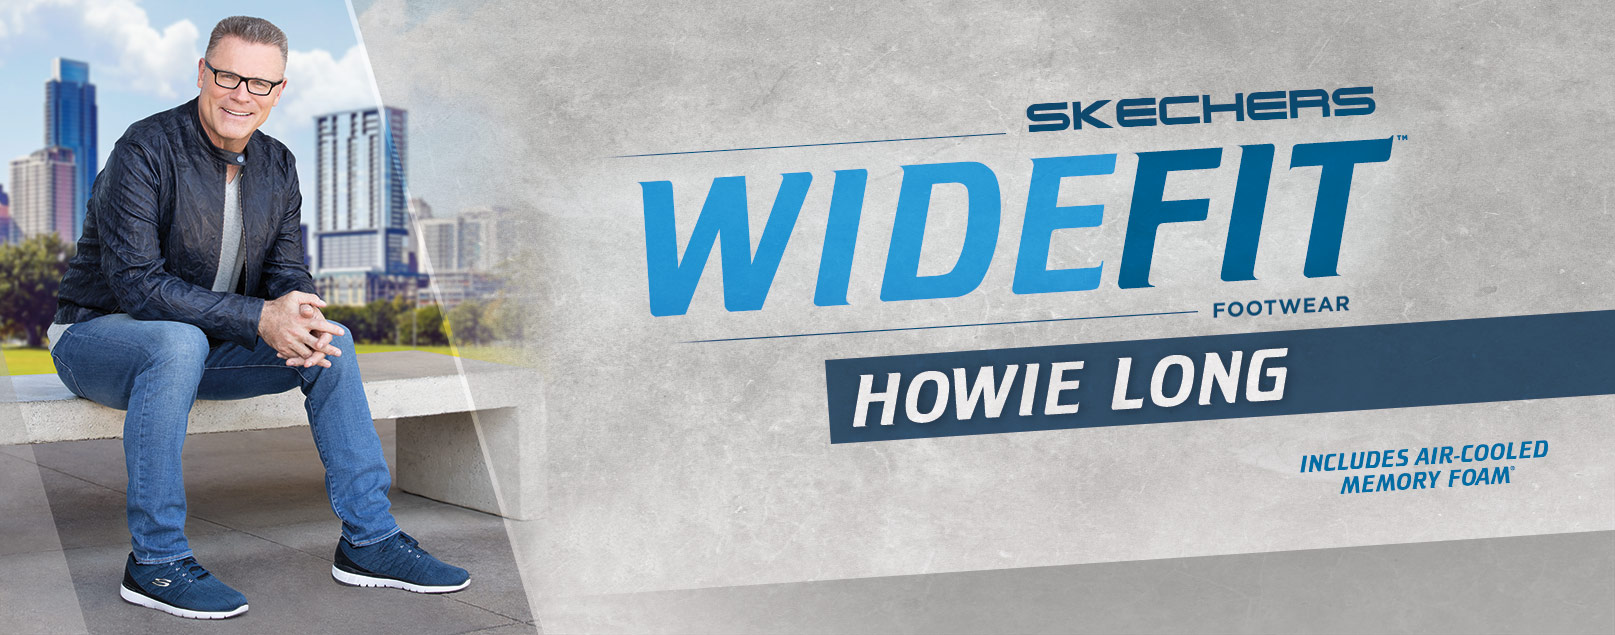 howie long skechers wide fit shoes commercial